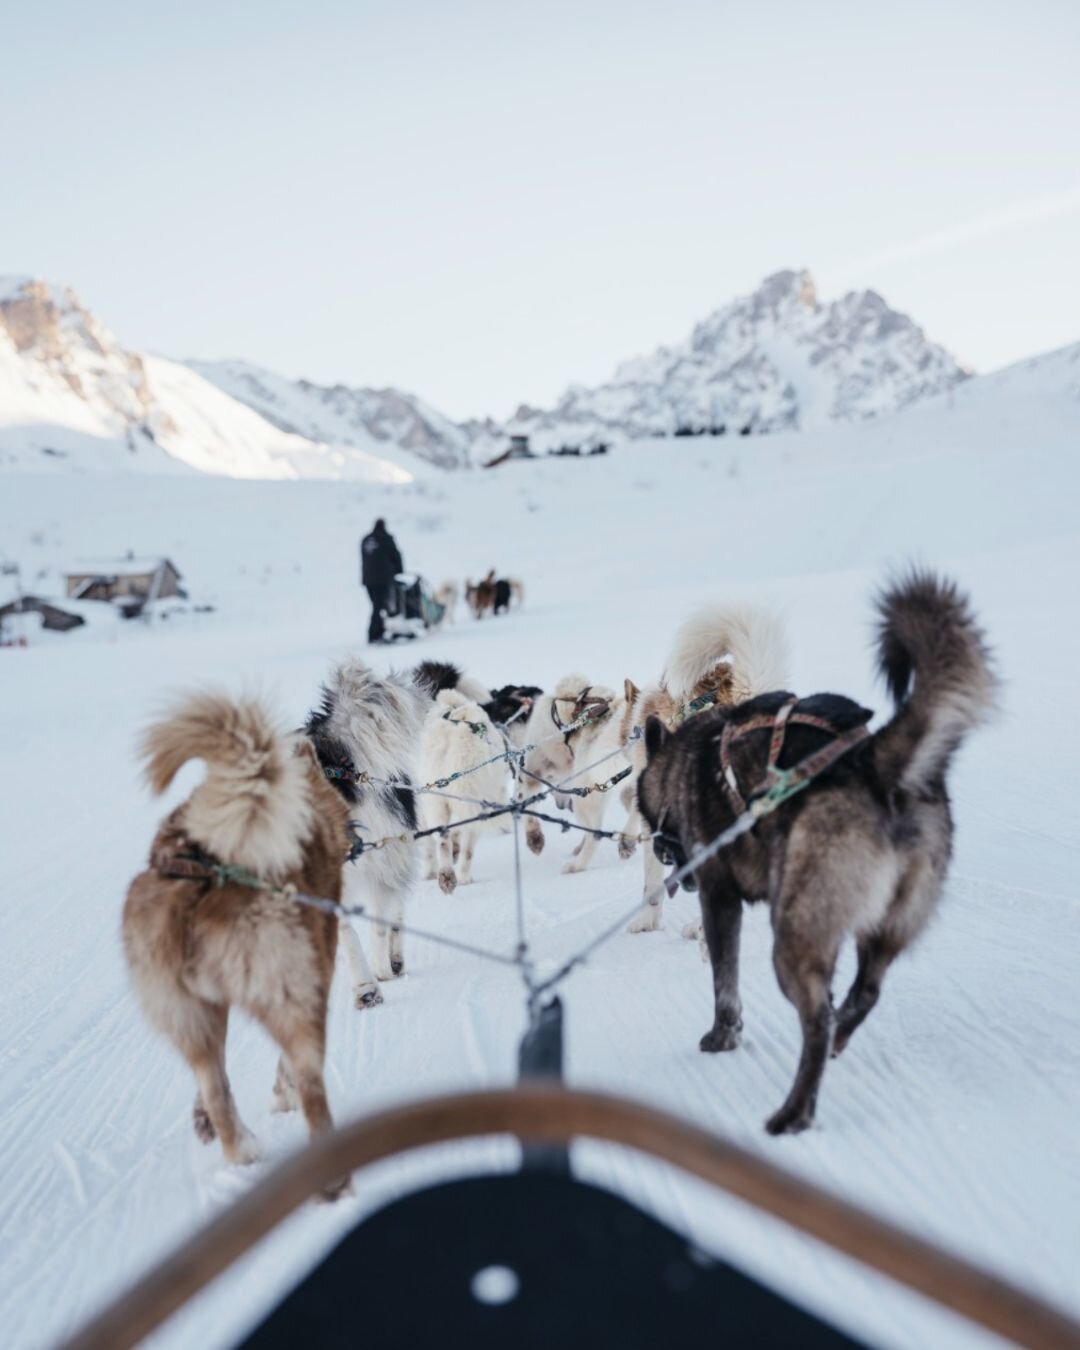 Immerse yourself in the icy elegance of winter with an exceptional dog sledding experience.

Let yourself be captivated by the grace of huskies in full action as you glide through snow-covered landscapes of timeless beauty.

Our dog sledding outi